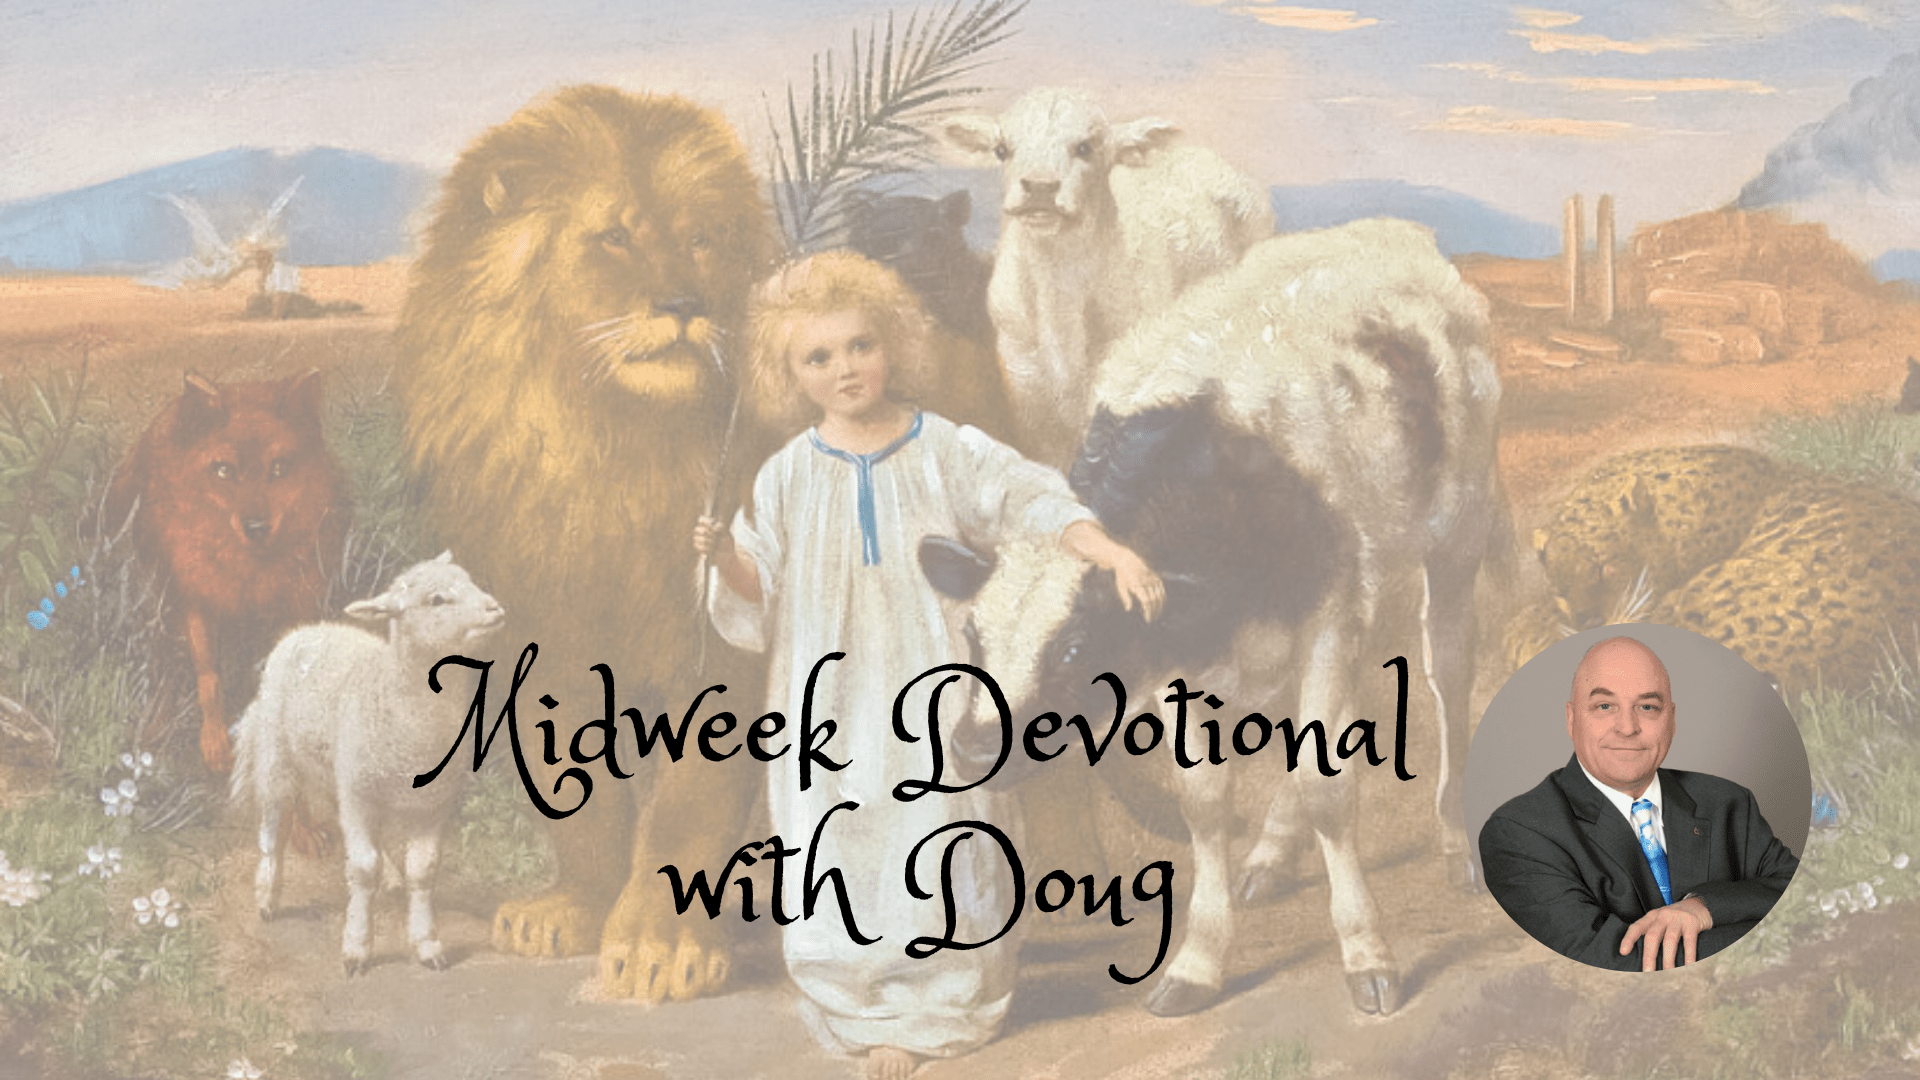 Midweek Devotional with Doug for second Wednesday of September